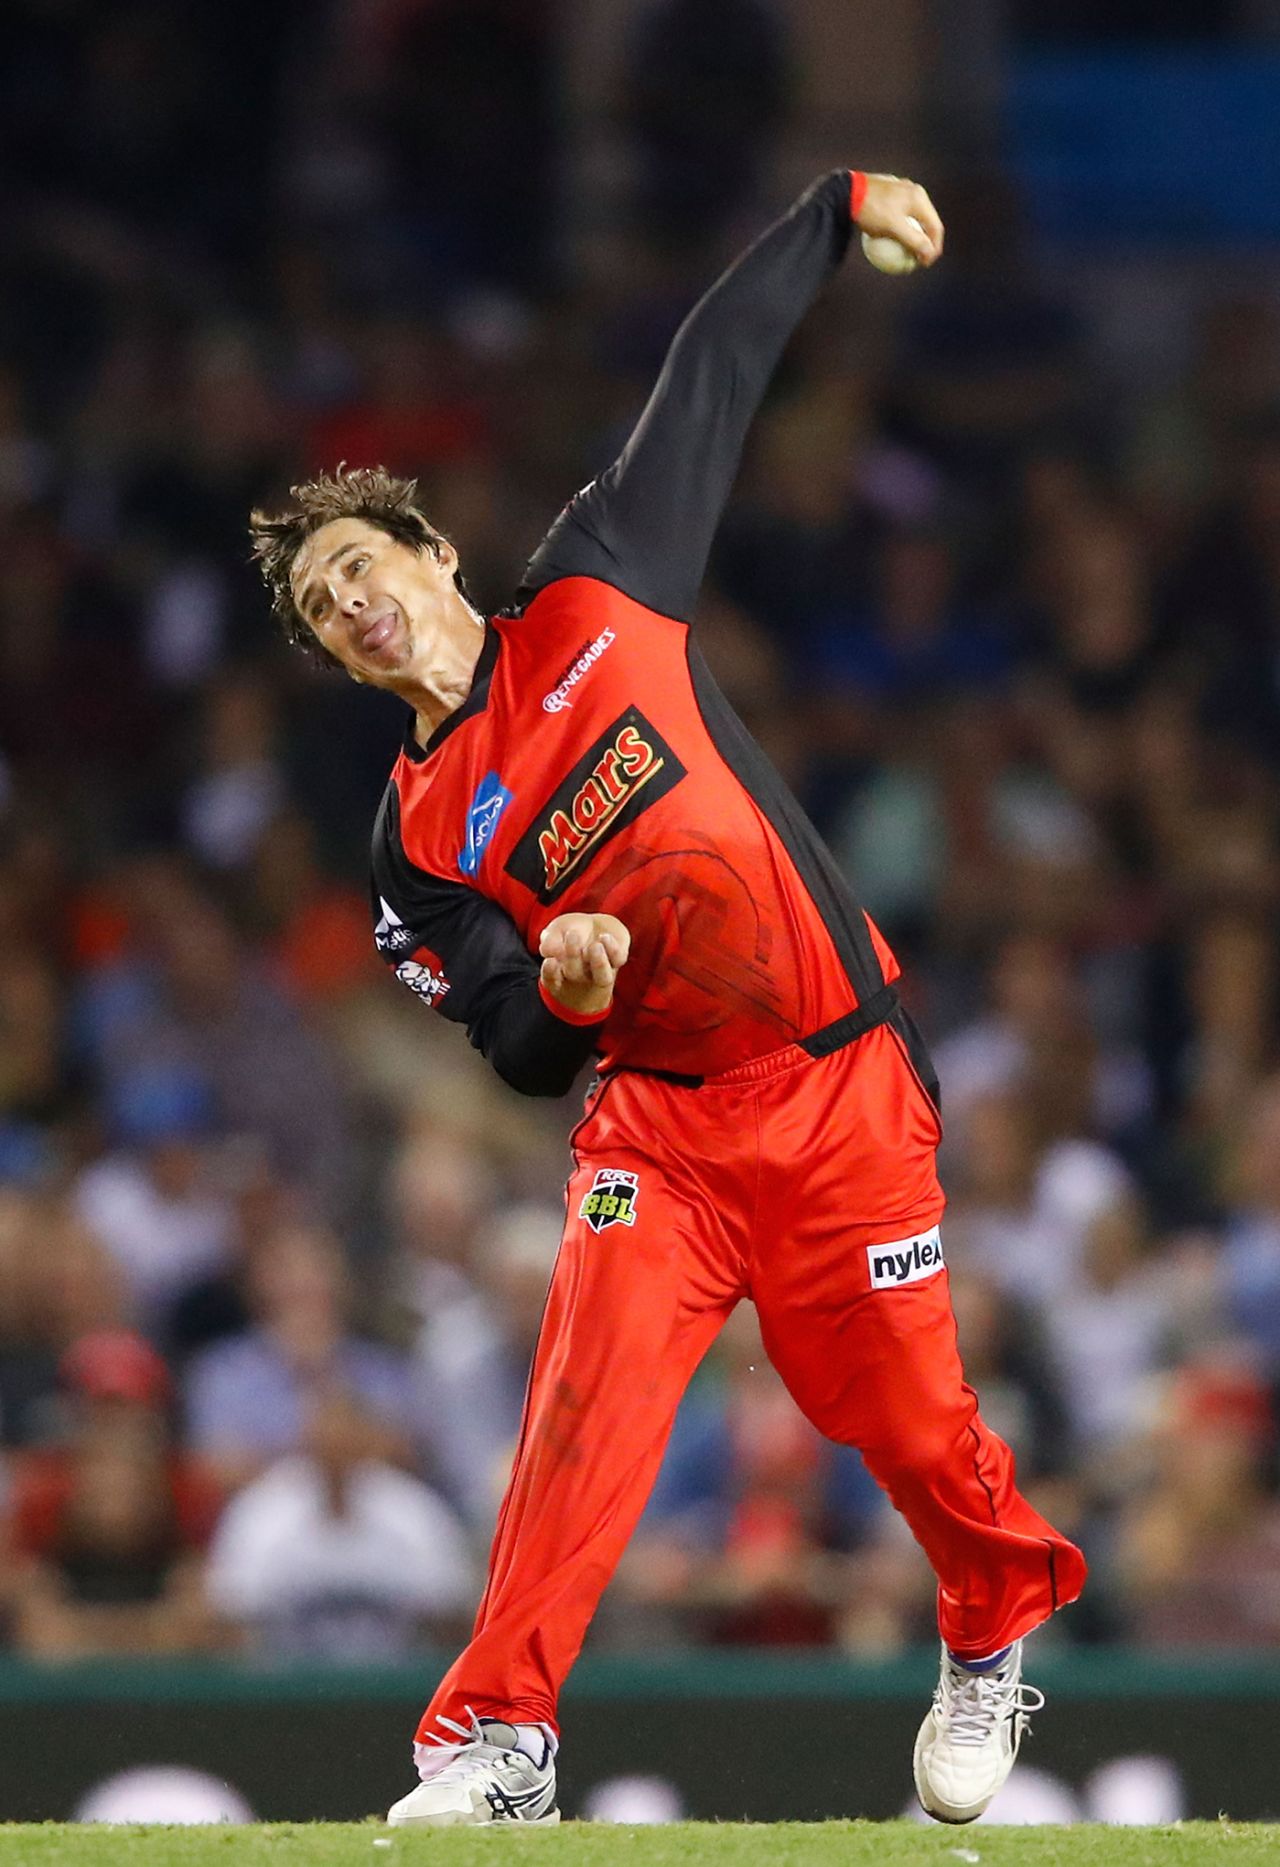 Brad Hogg picked up two wickets and only conceded 16 in his four overs, Melbourne Renegades v Perth Scorchers, BBL 2017-18, Docklands Stadium, December 29, 2017